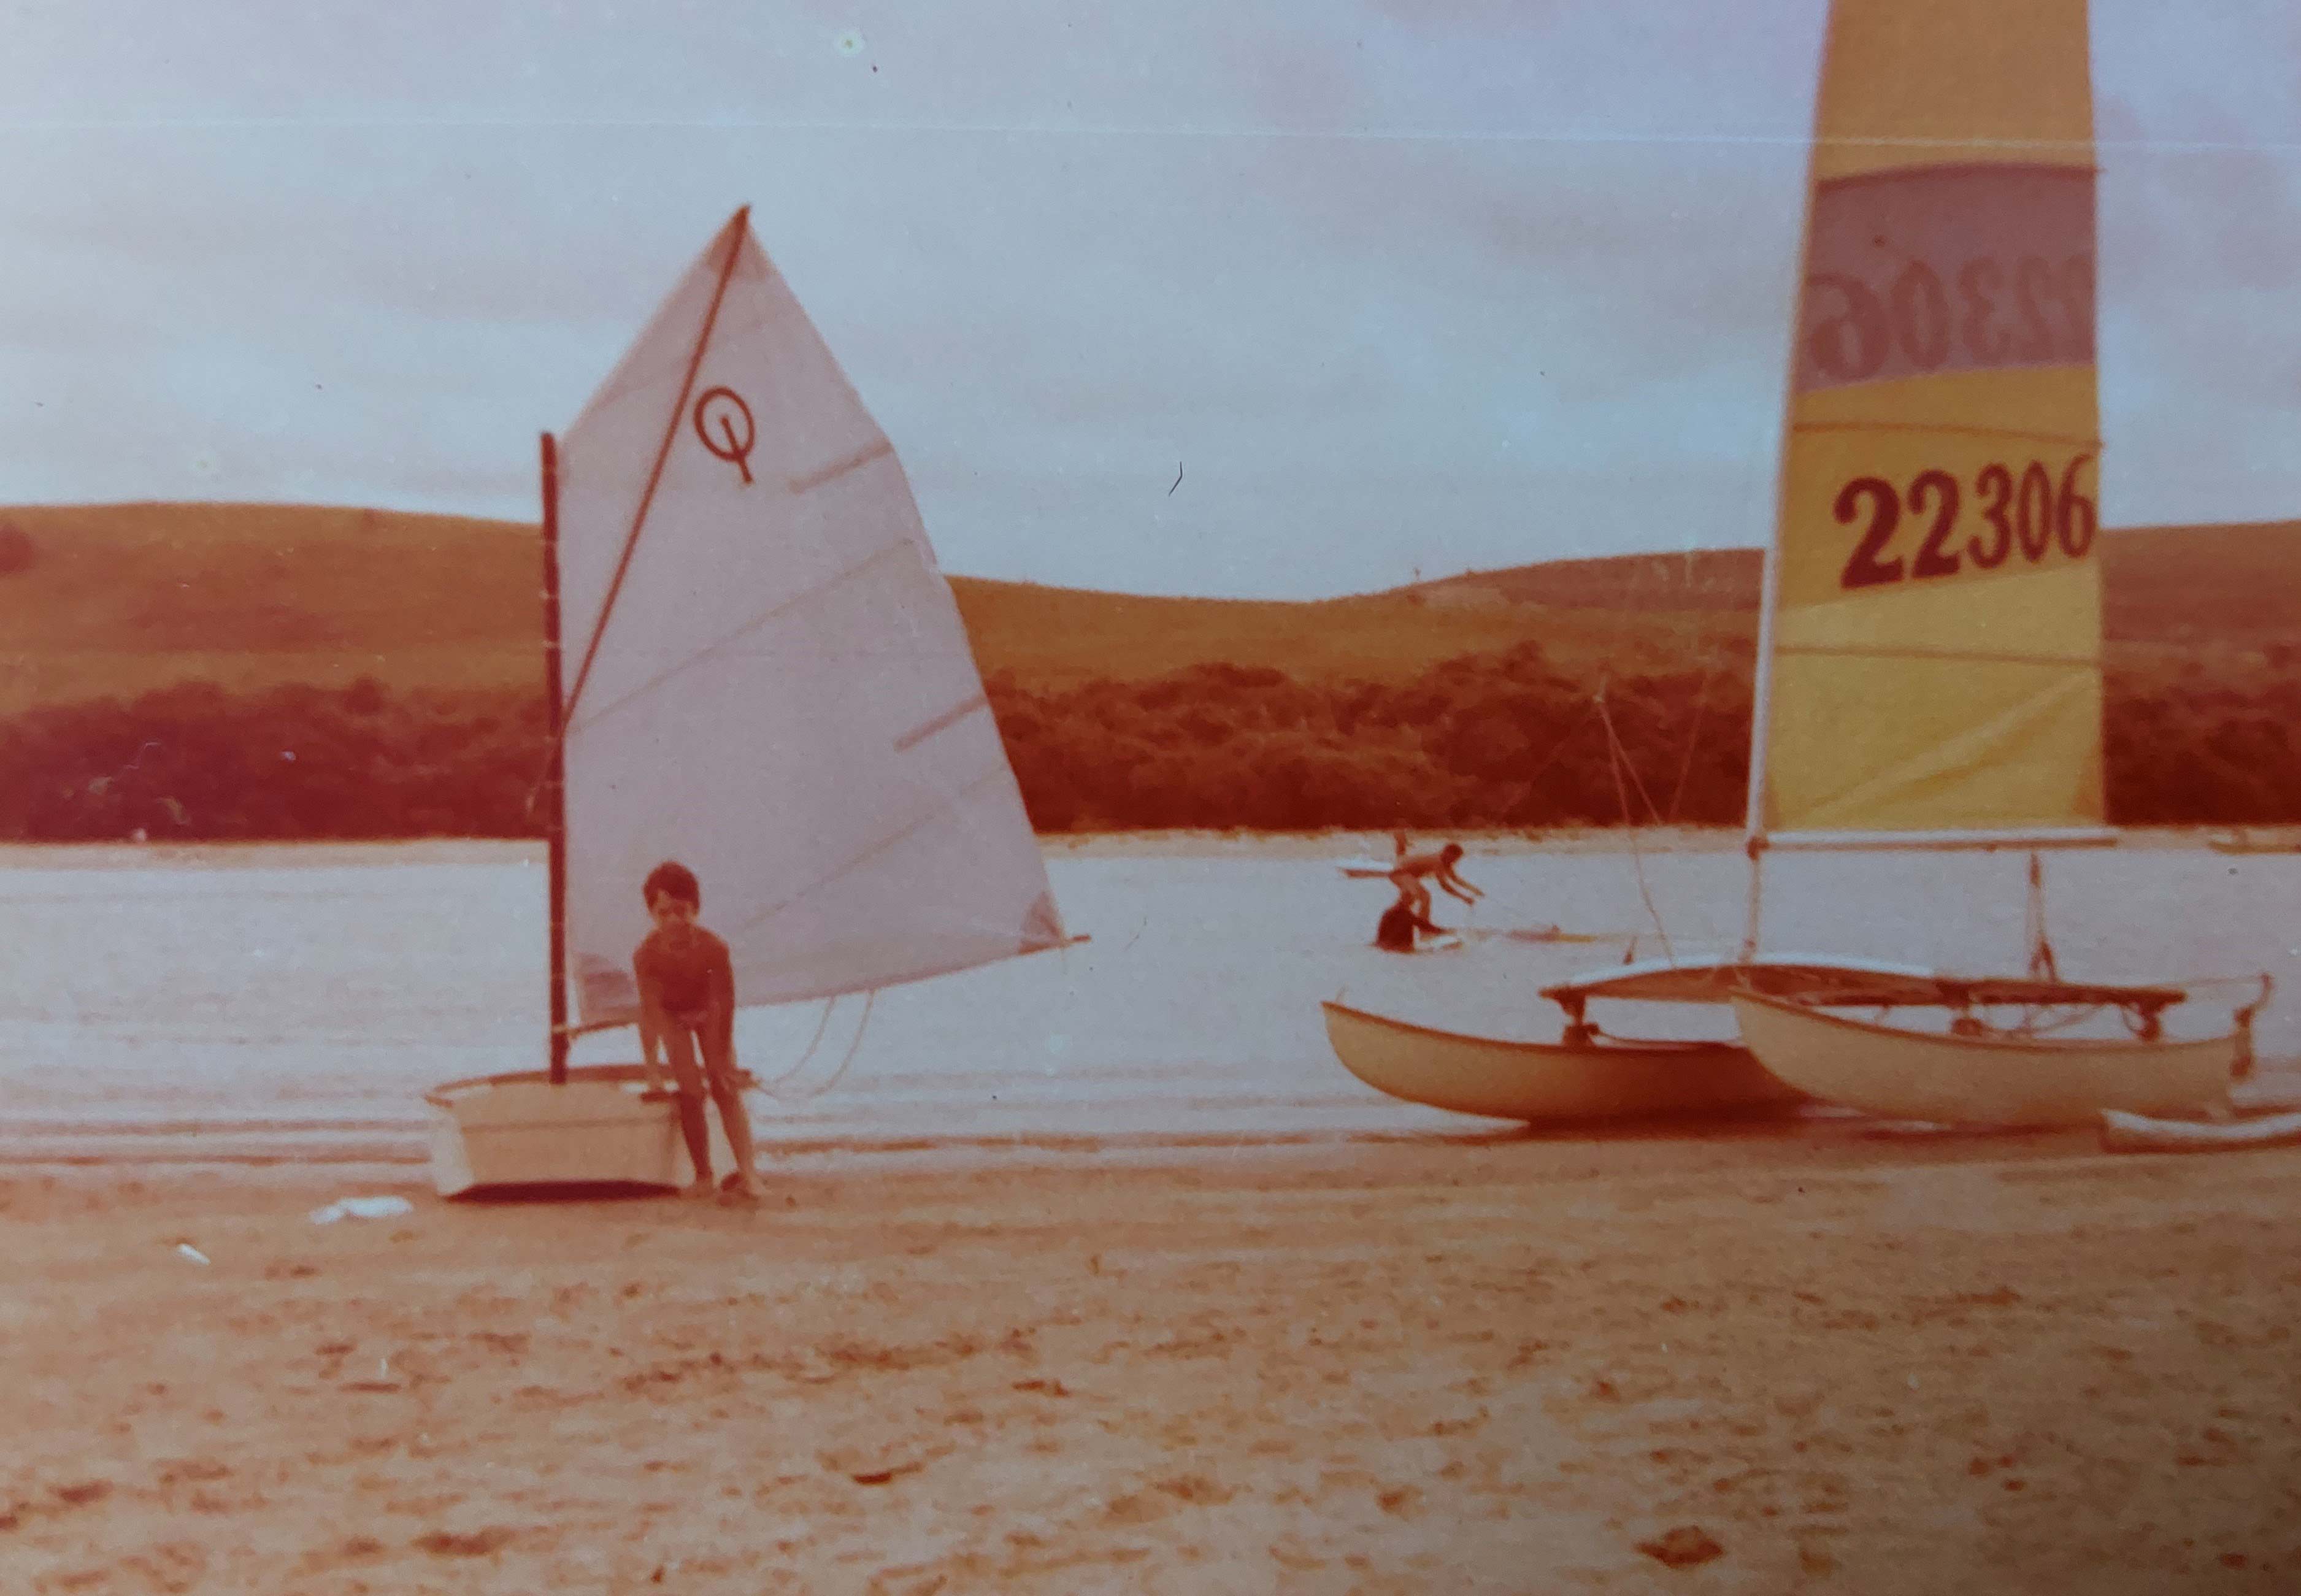 A young boy standing next to some sail boats on a beach. The boats have white and yellow sails.